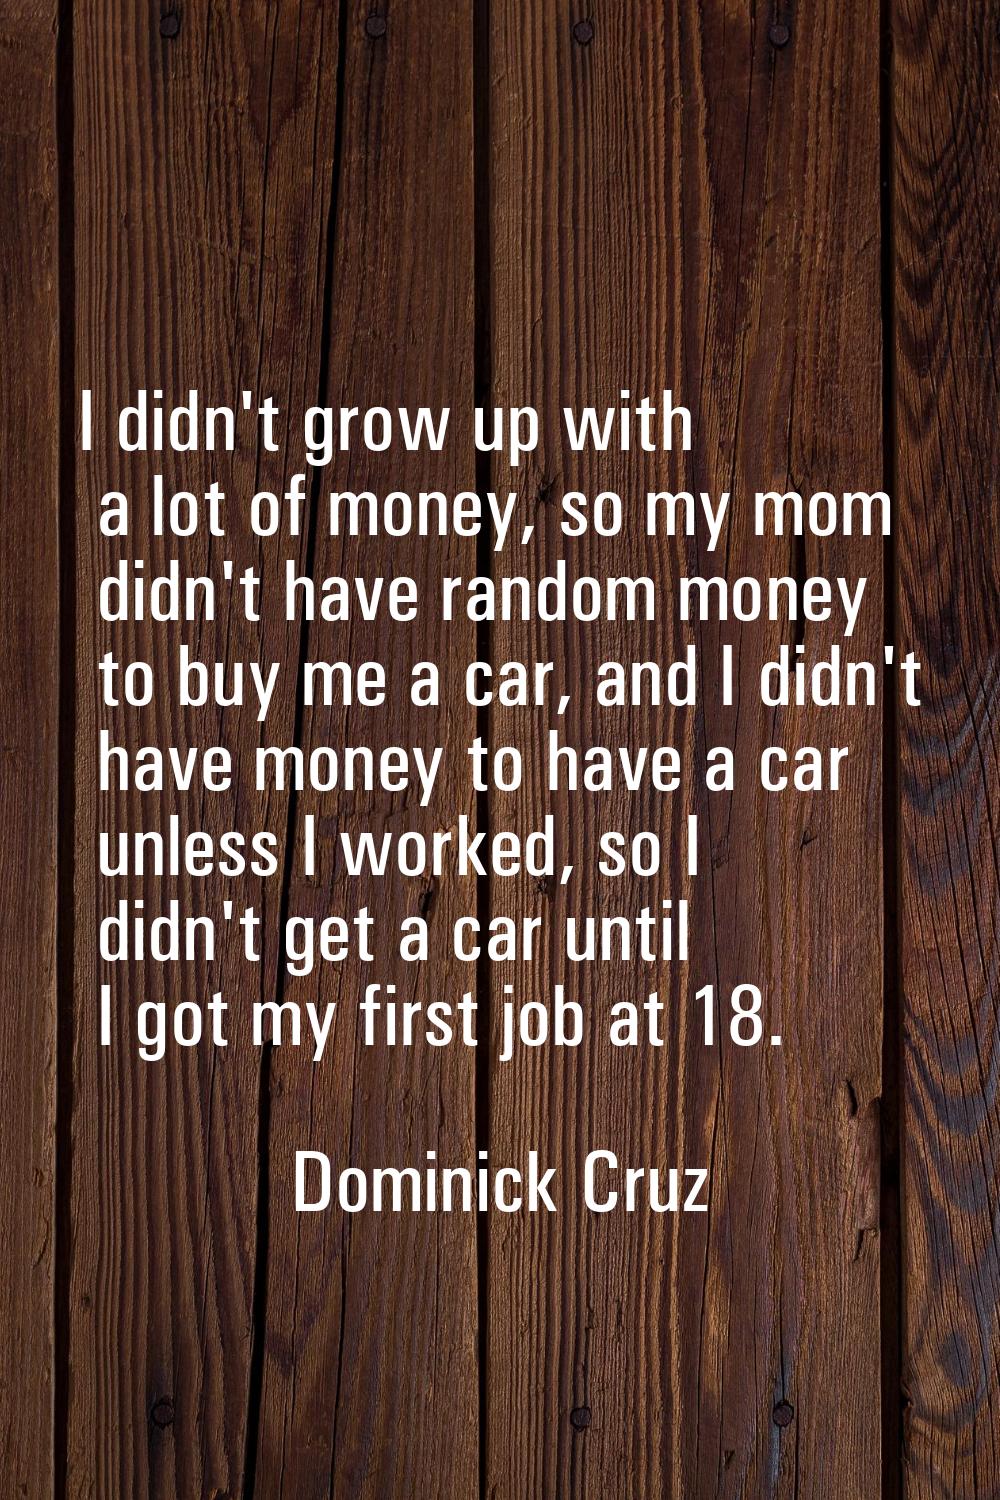 I didn't grow up with a lot of money, so my mom didn't have random money to buy me a car, and I did